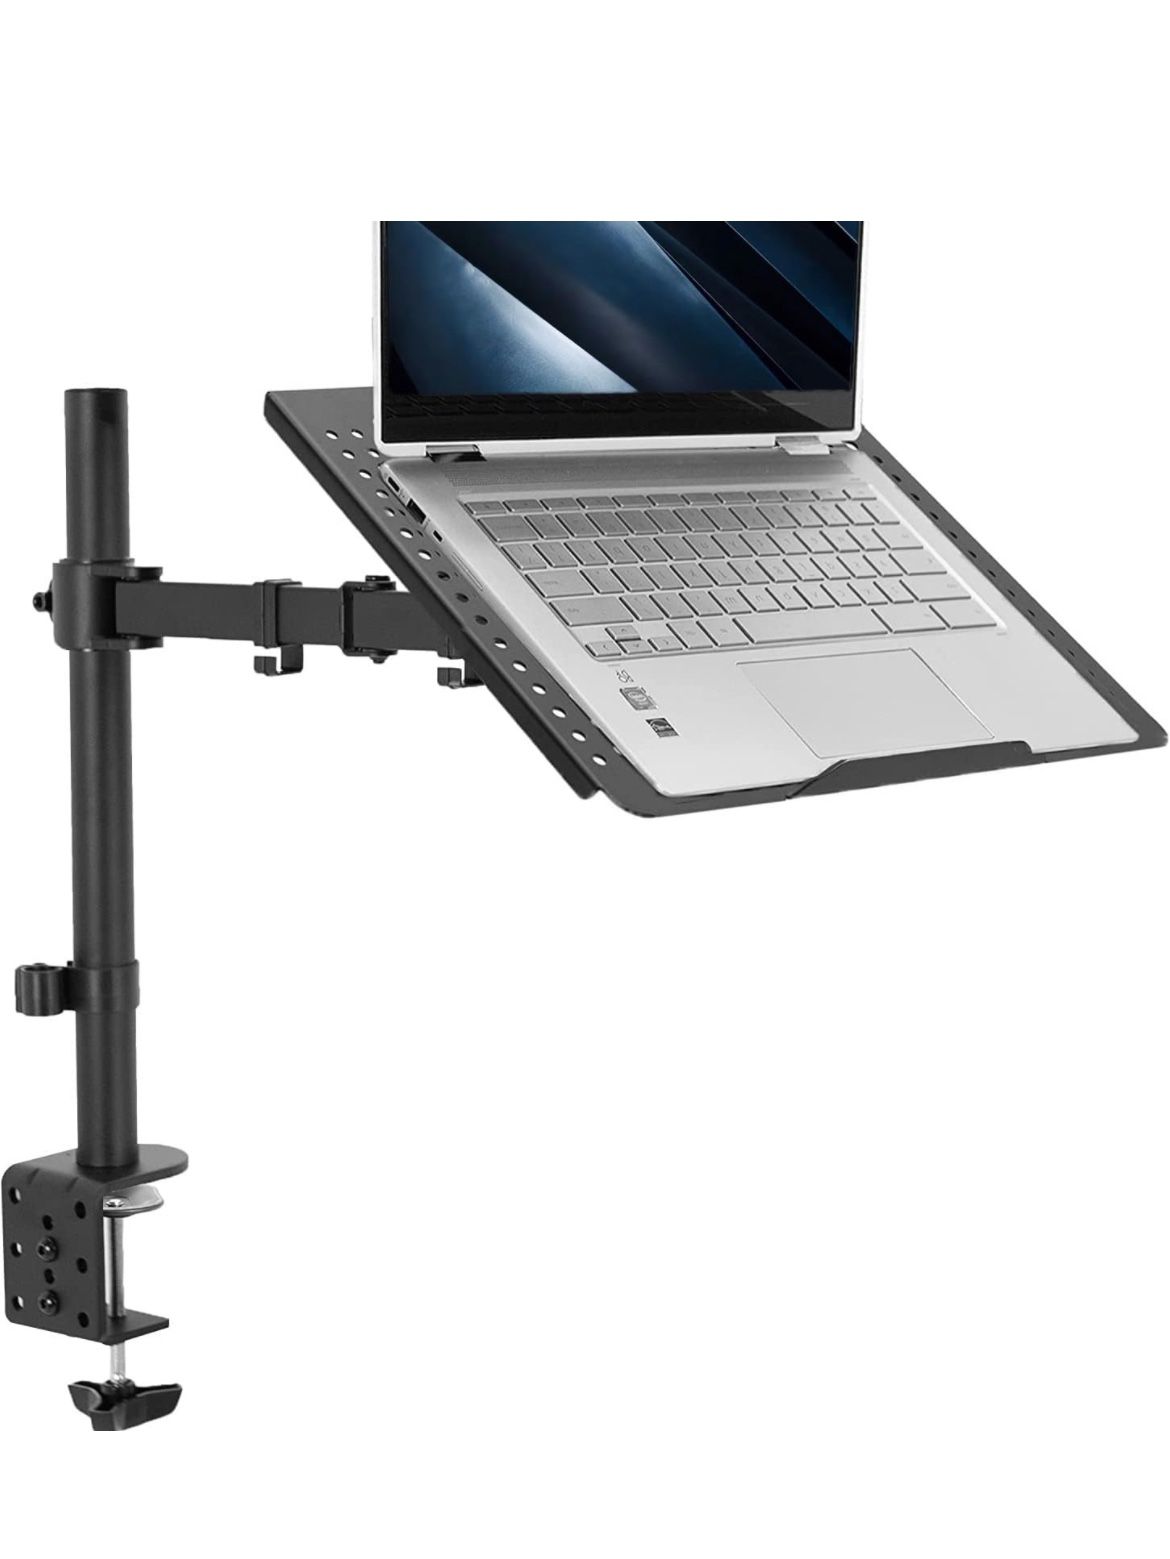 Brand New VIVO Laptop Notebook Desk Mount Stand, Fully Adjustable Extension with C-clamp, Fits up to 17 inch Laptops, Black